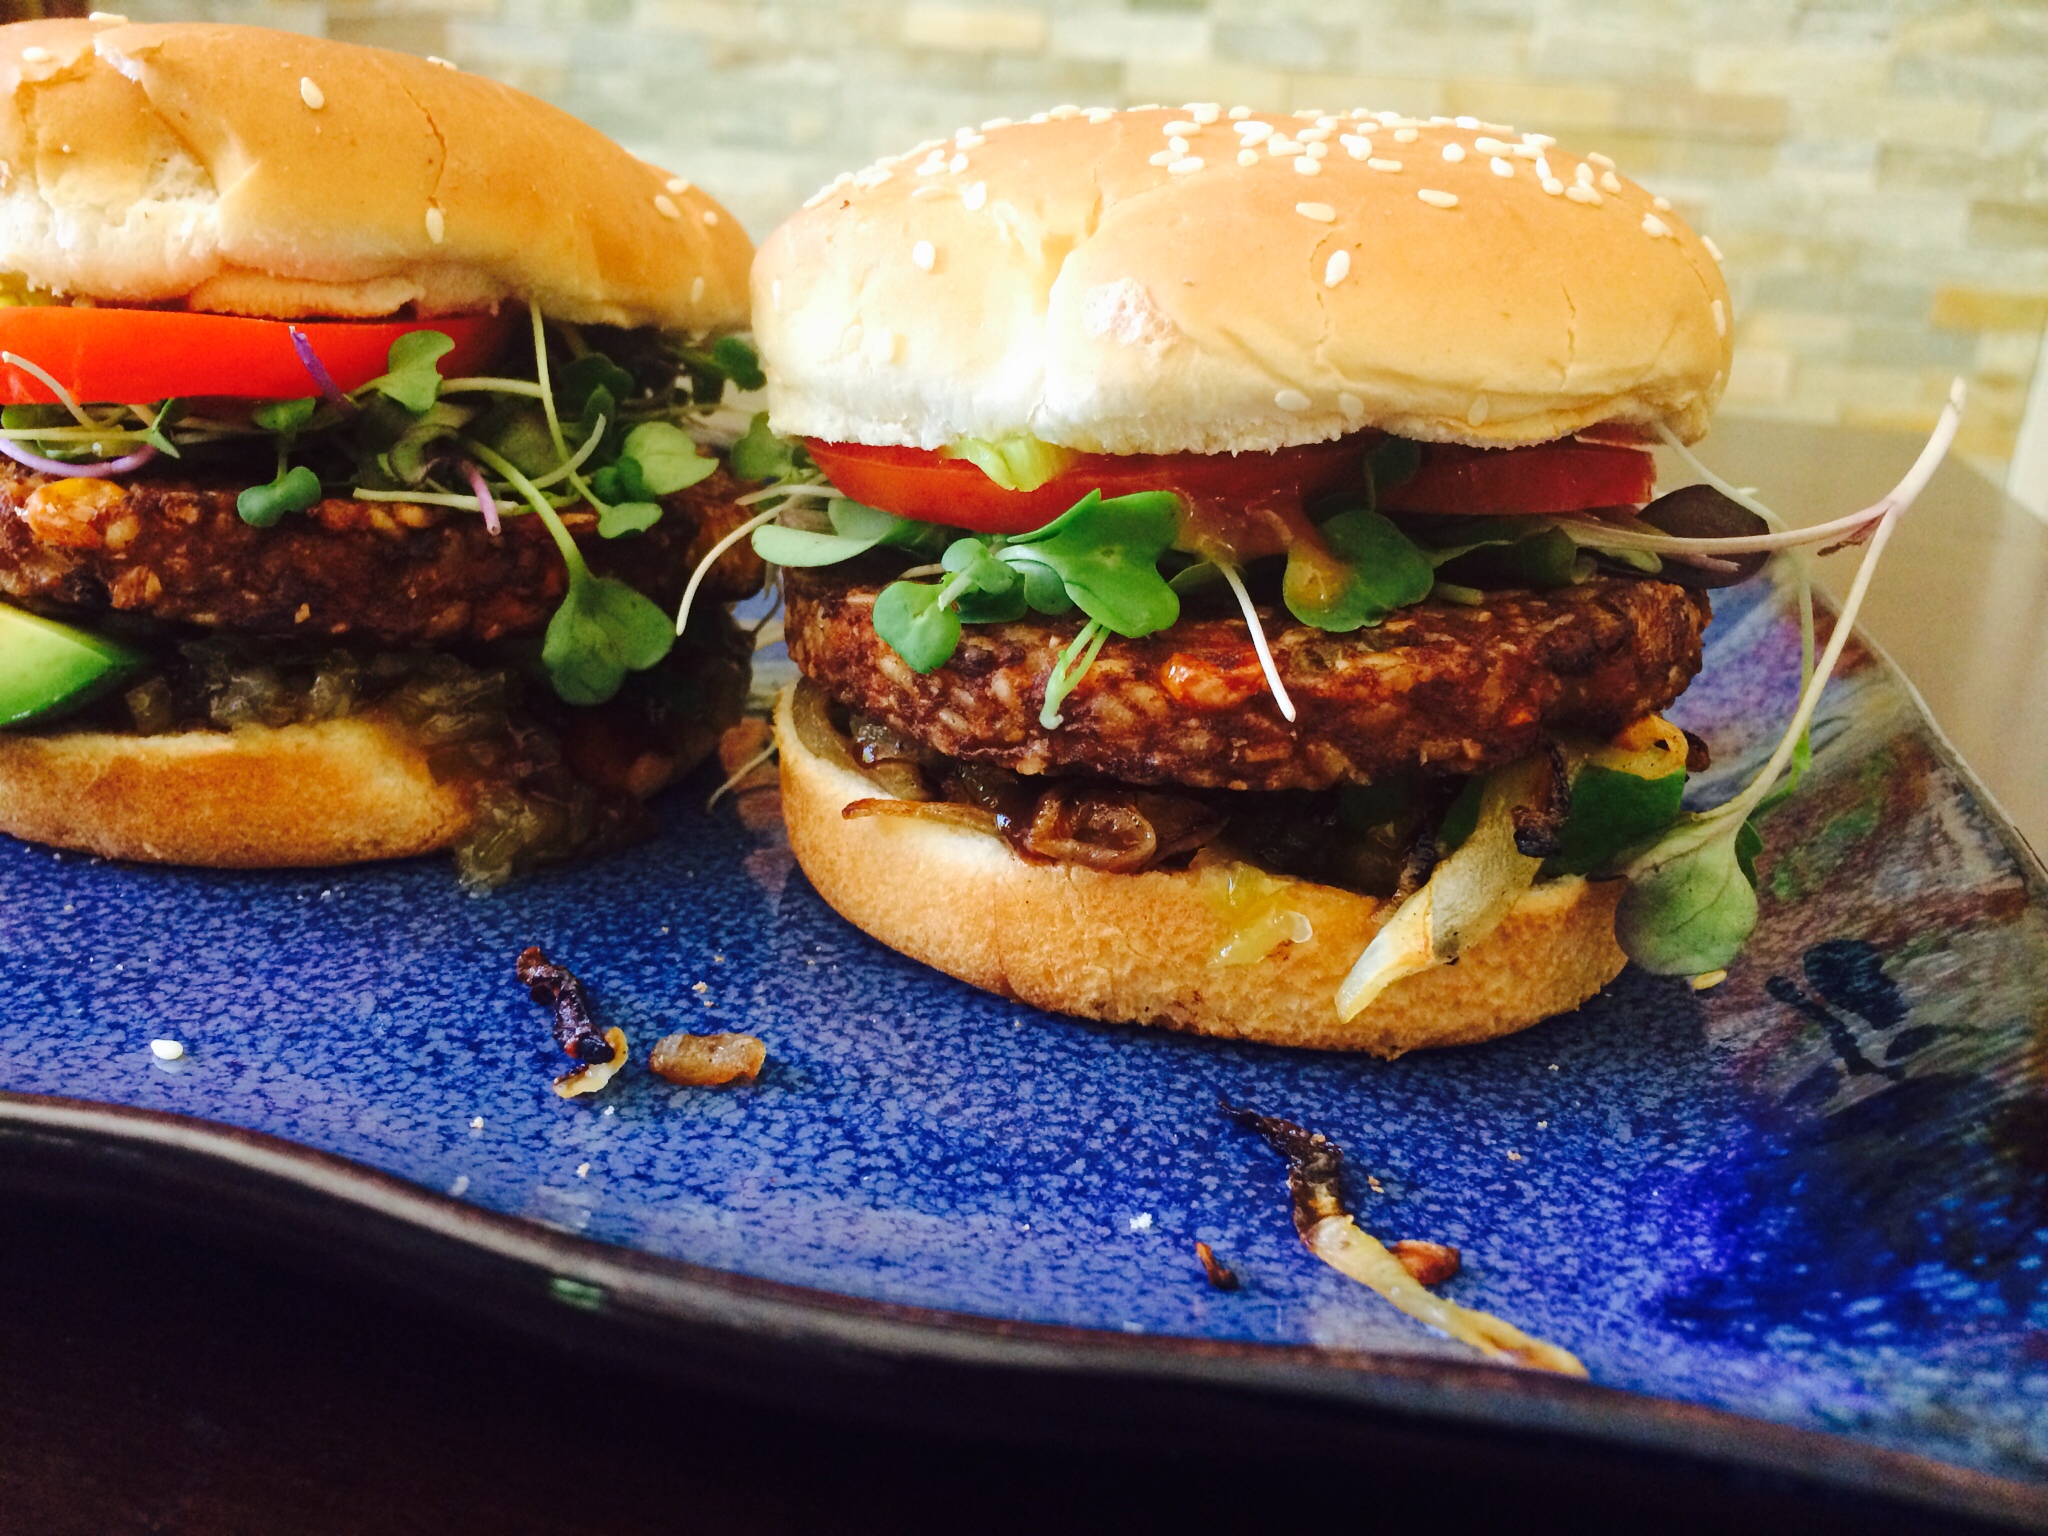 Brown Rice and Kale Burger with Microgreens